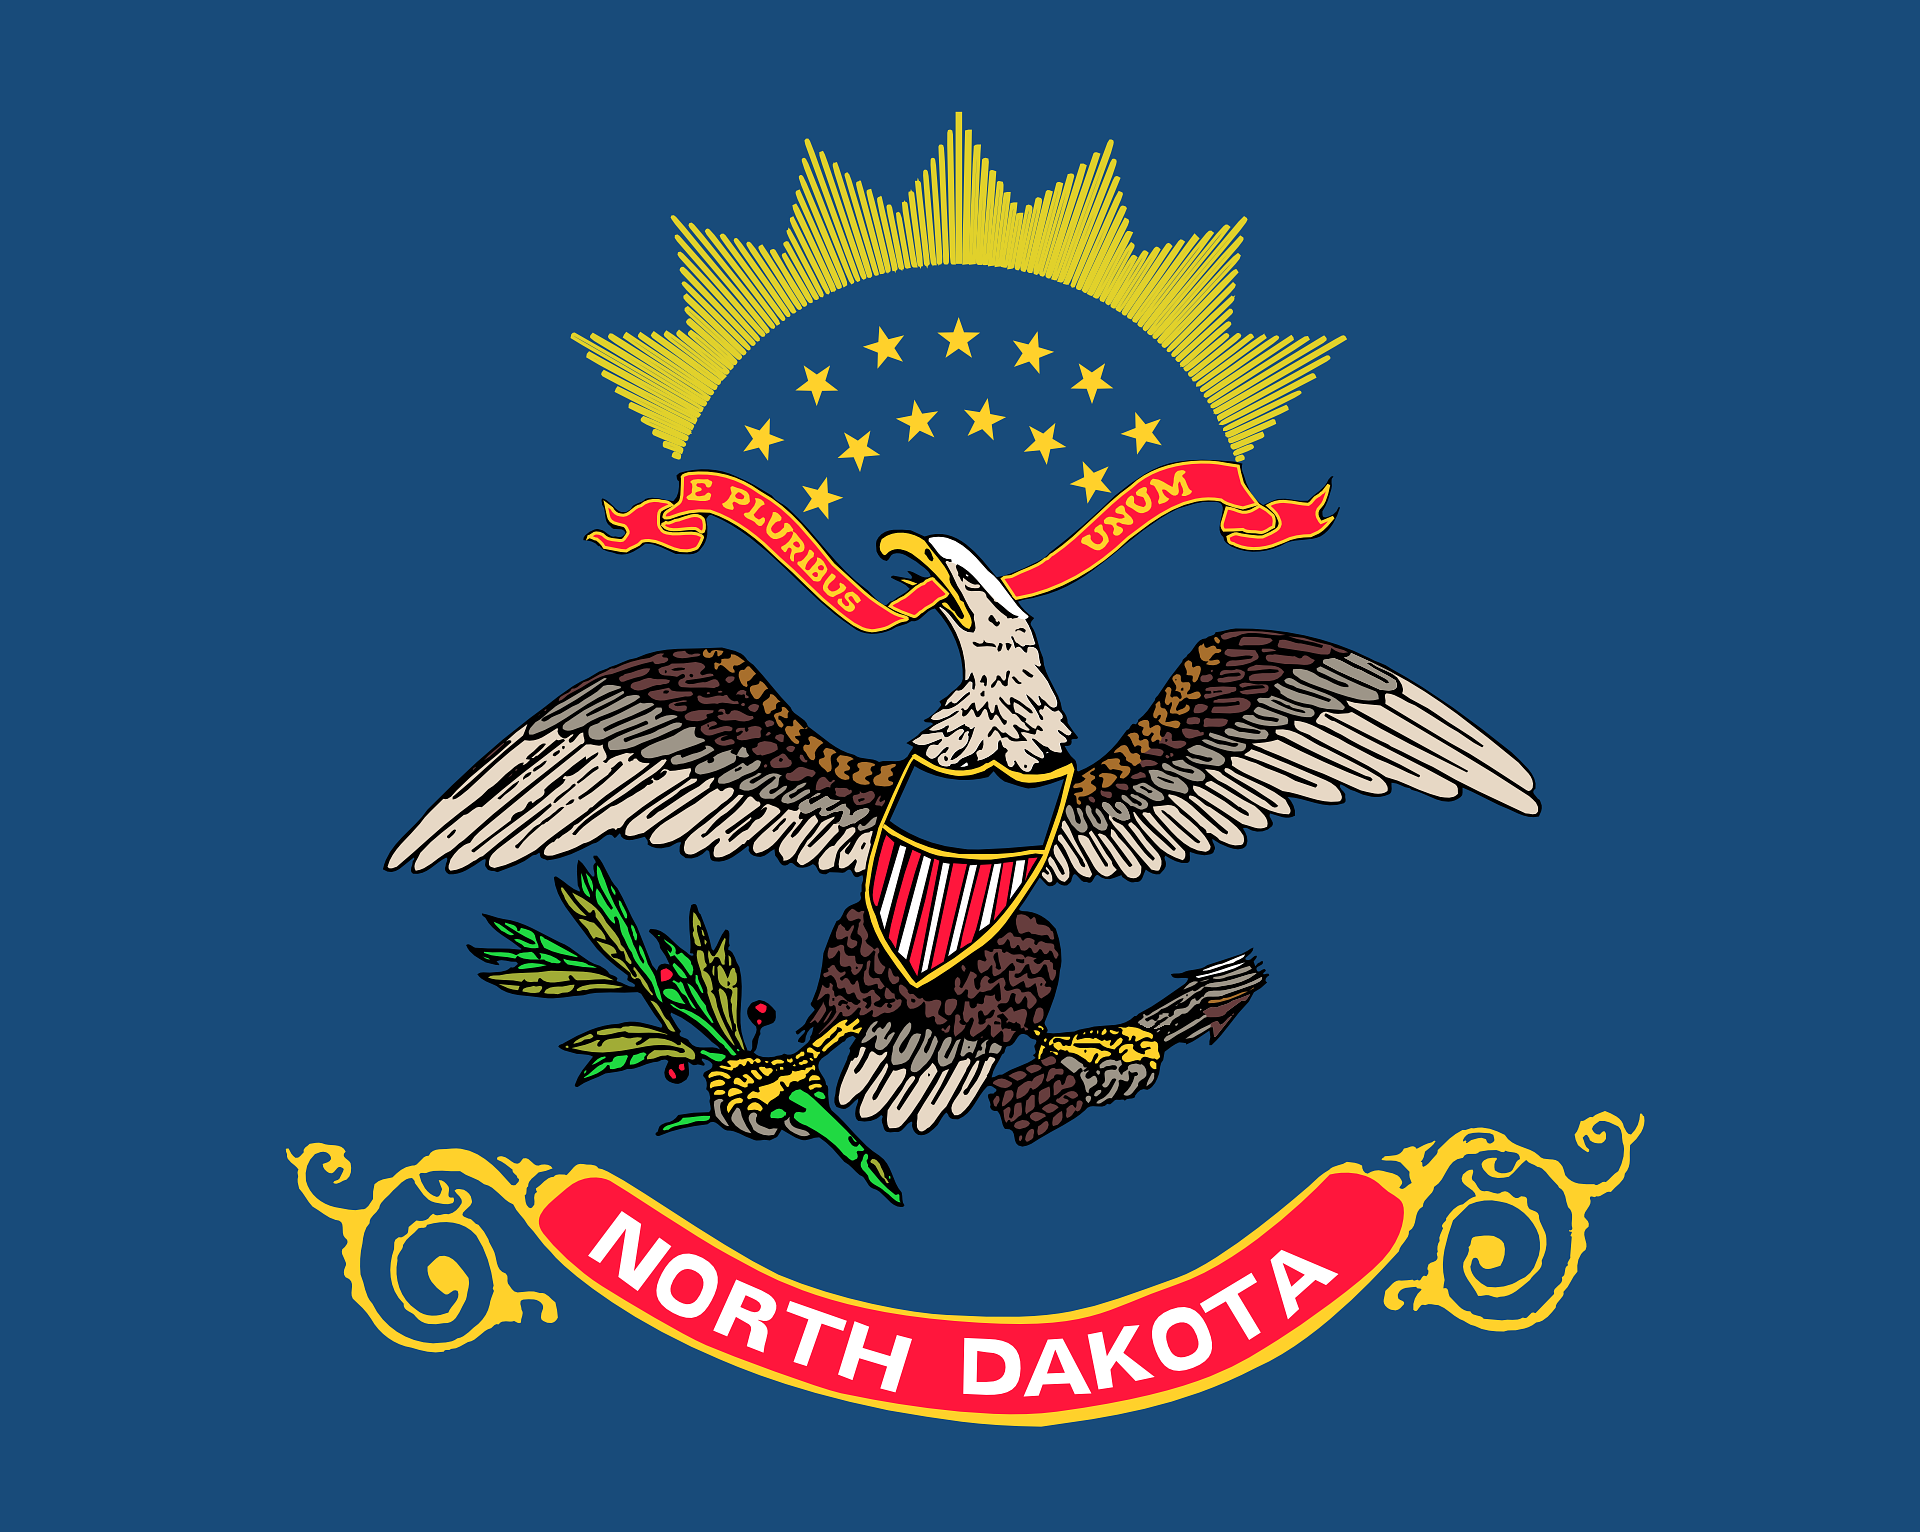 Image for Gen Z Is Moving to North Dakota